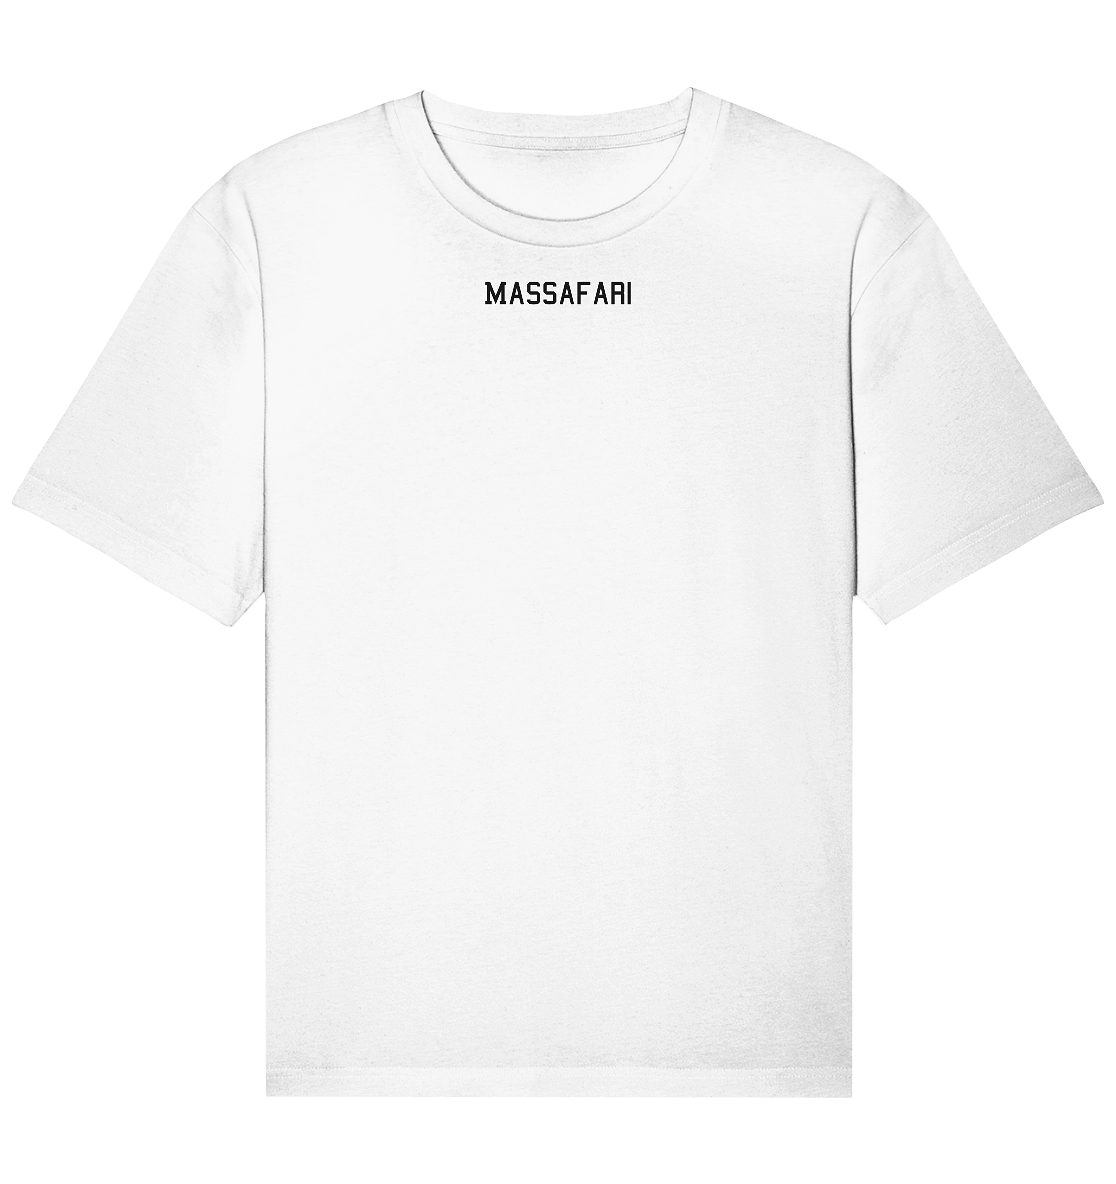 front-organic-relaxed-shirt-f8f8f8-1116x-3.png